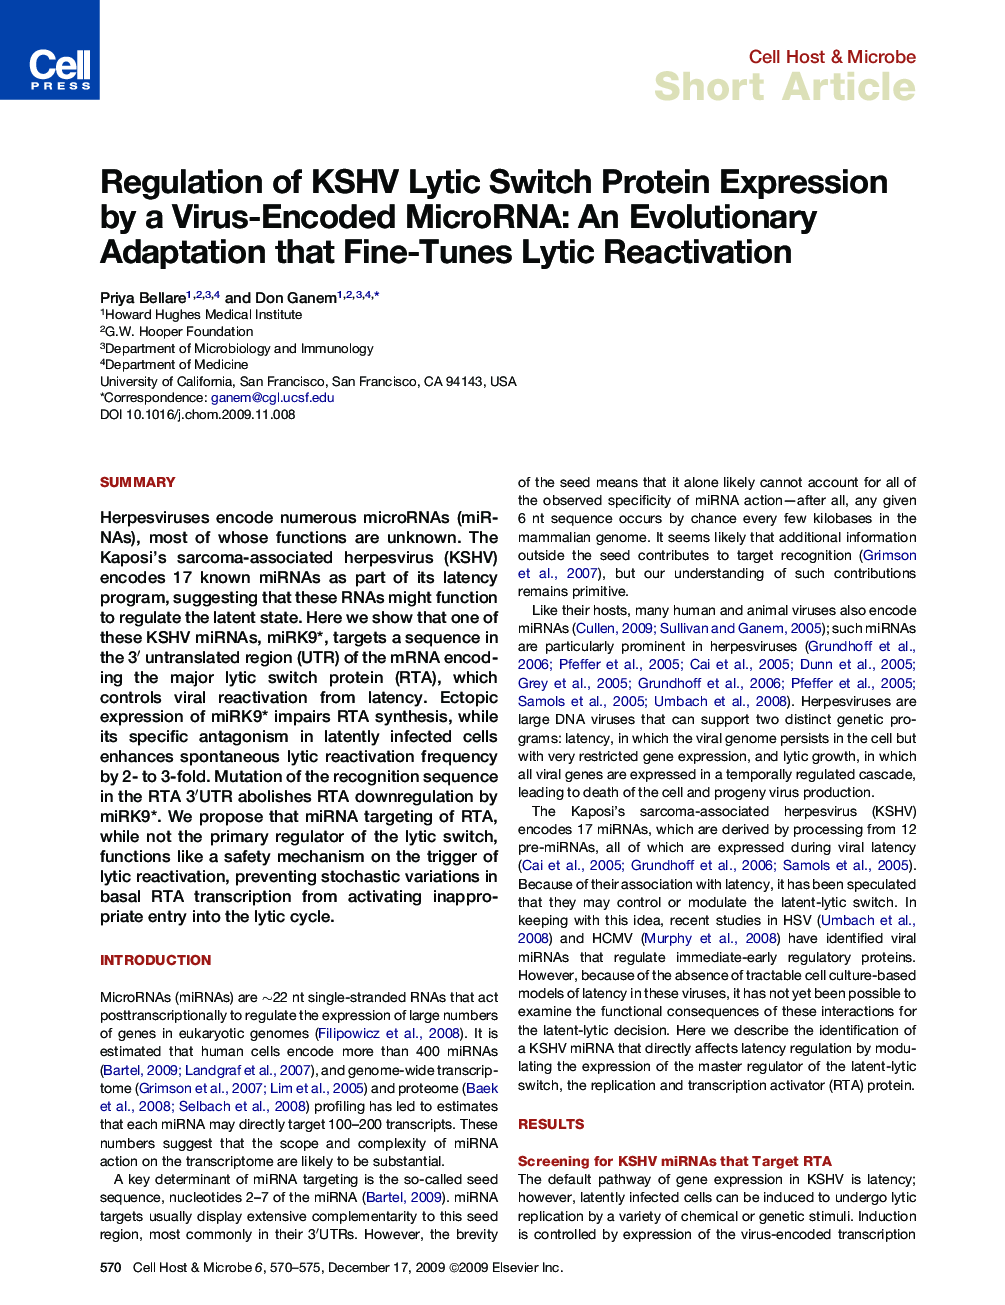 Regulation of KSHV Lytic Switch Protein Expression by a Virus-Encoded MicroRNA: An Evolutionary Adaptation that Fine-Tunes Lytic Reactivation